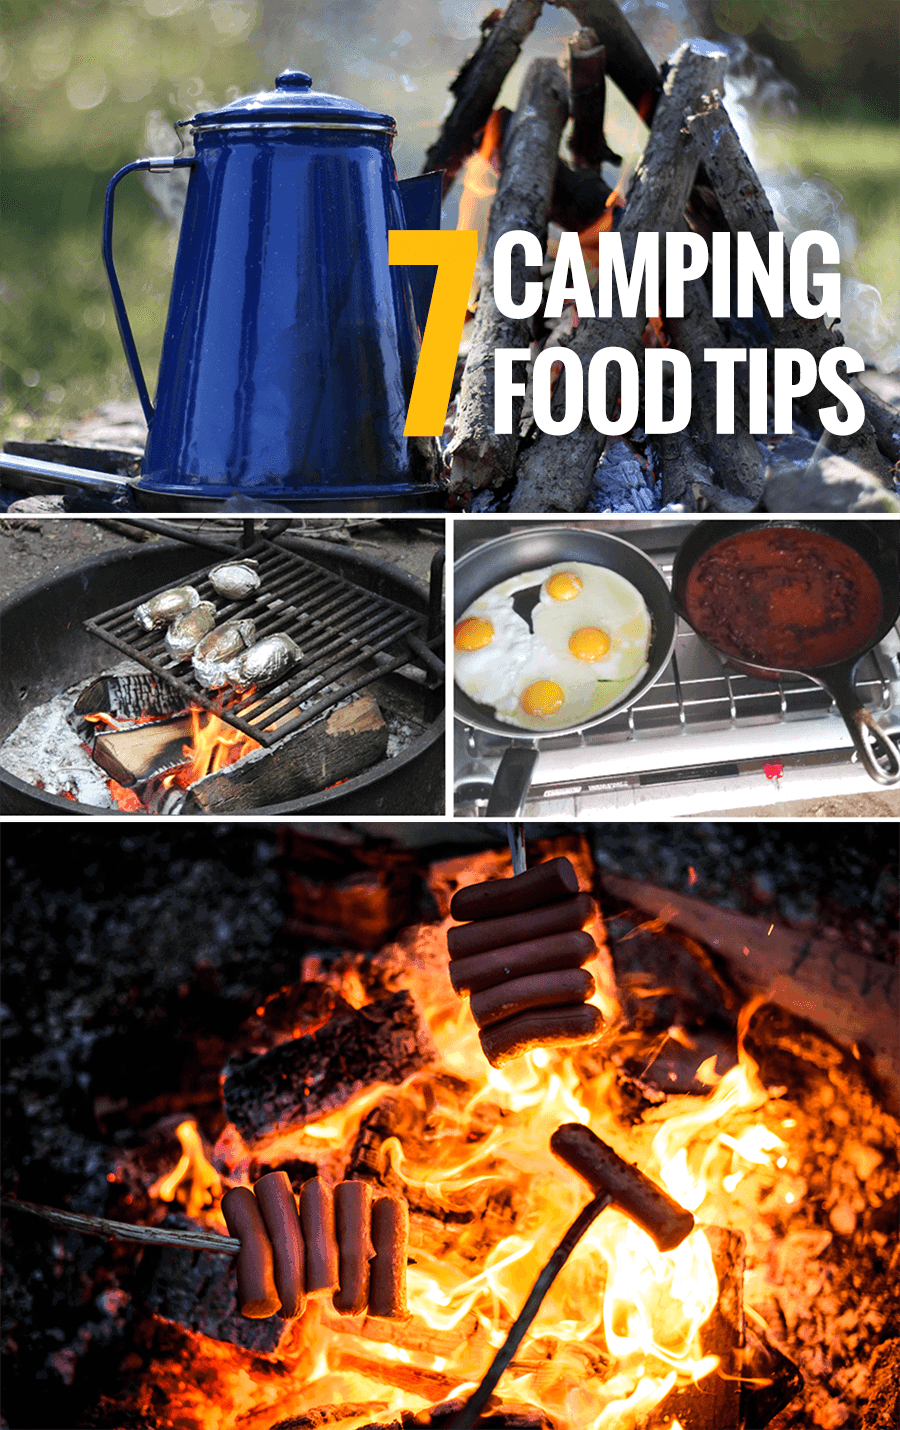 This list of family camping tips is a must-read for parents planning an outdoor vacation. *So simple and brilliant. Saving this for our summer trip.